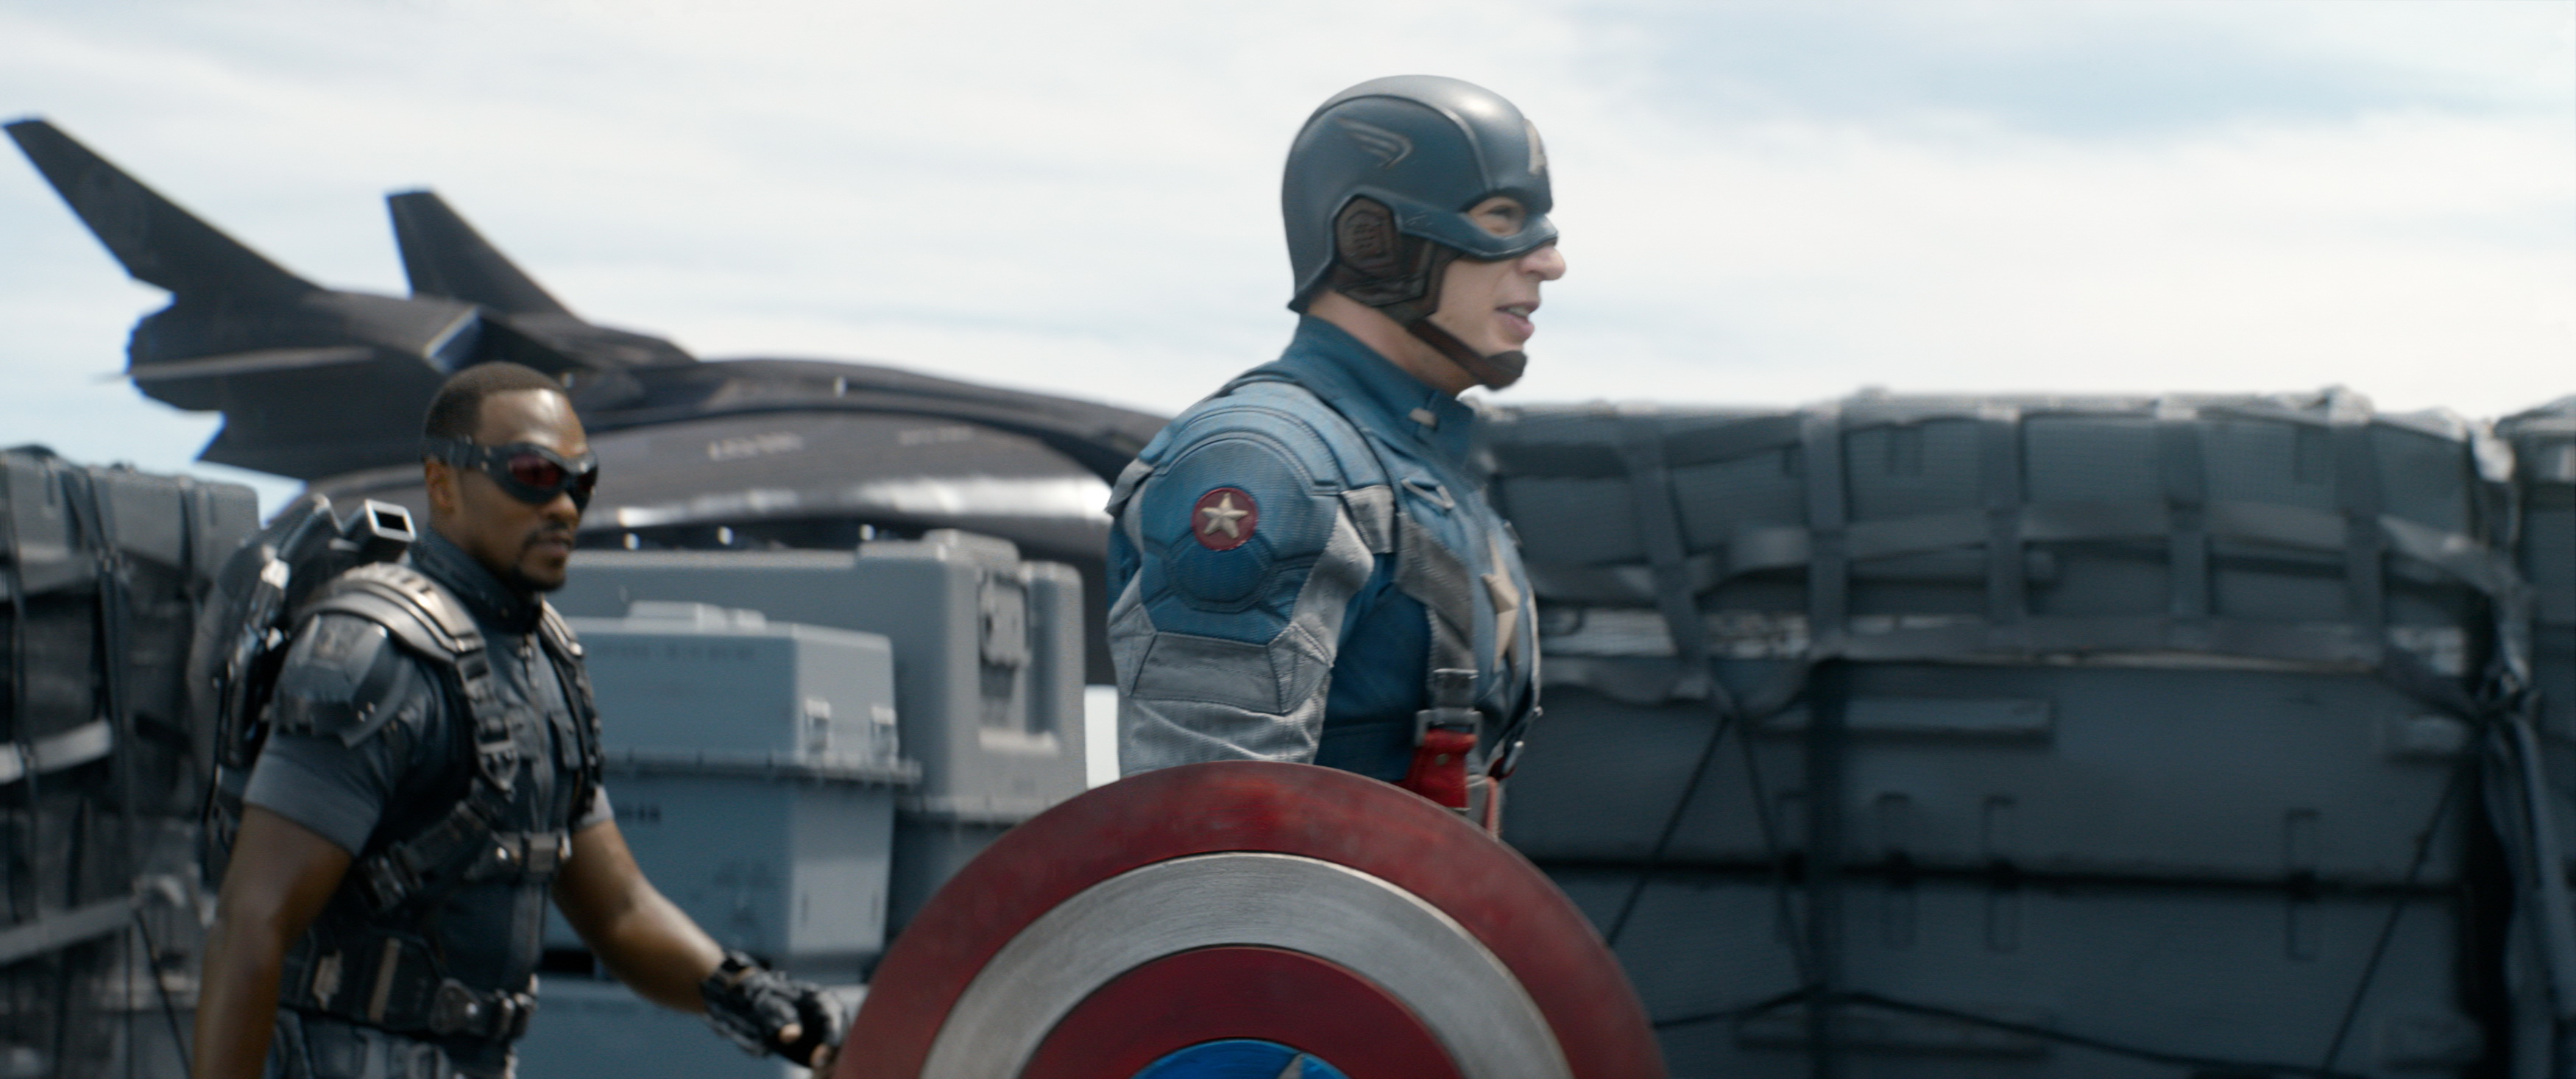 Captain America The Winter Soldier (2014) Movie Story Summary & Review